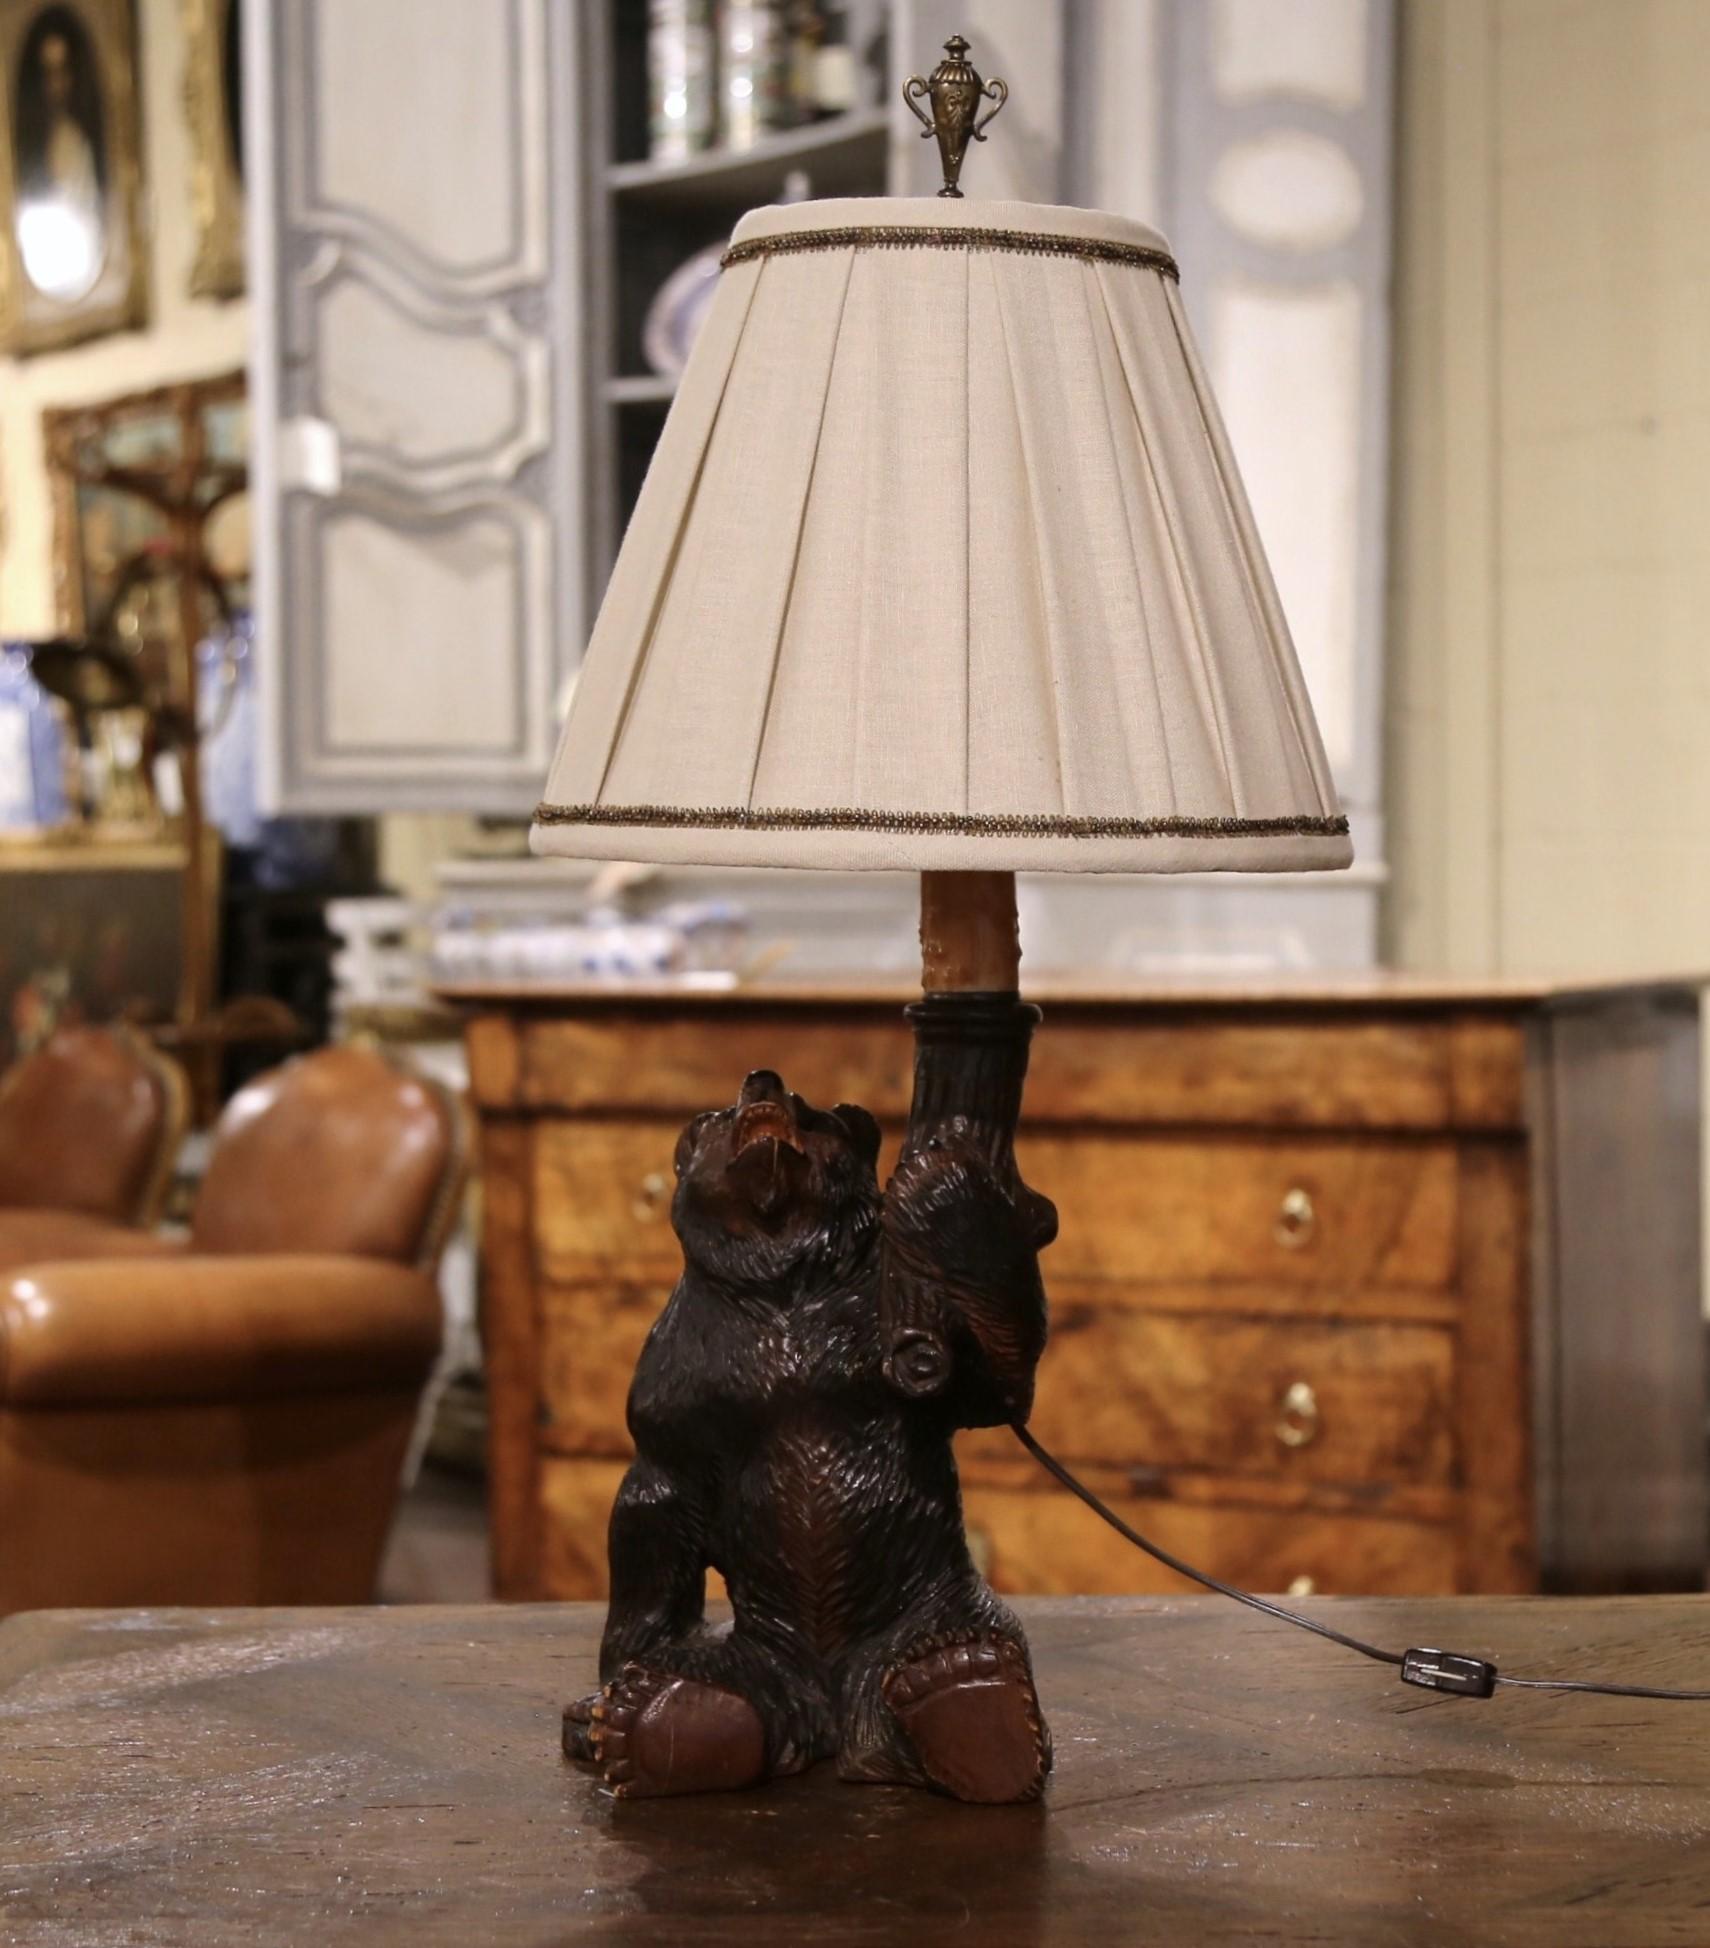 Decorate a ranch or hunting lodge with this elegant table lamp. Crafted in France circa 1880, this lamp depicts a carved sited bear holding a torch; the fixture has new wiring and is dressed with a real wax candle. The Black Forest fixture is in